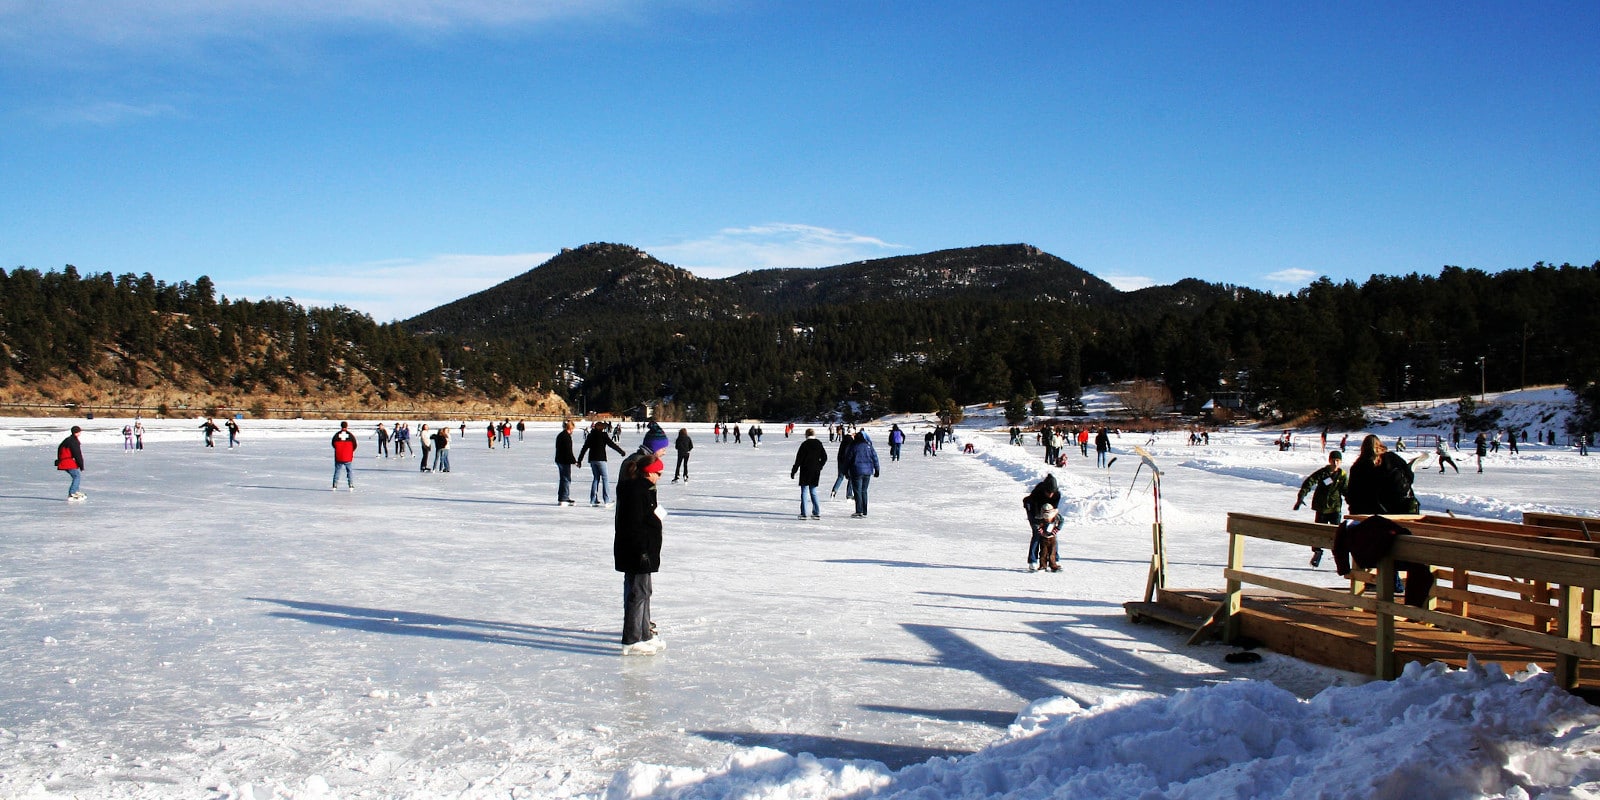 Ice skating in Evergreen, CO